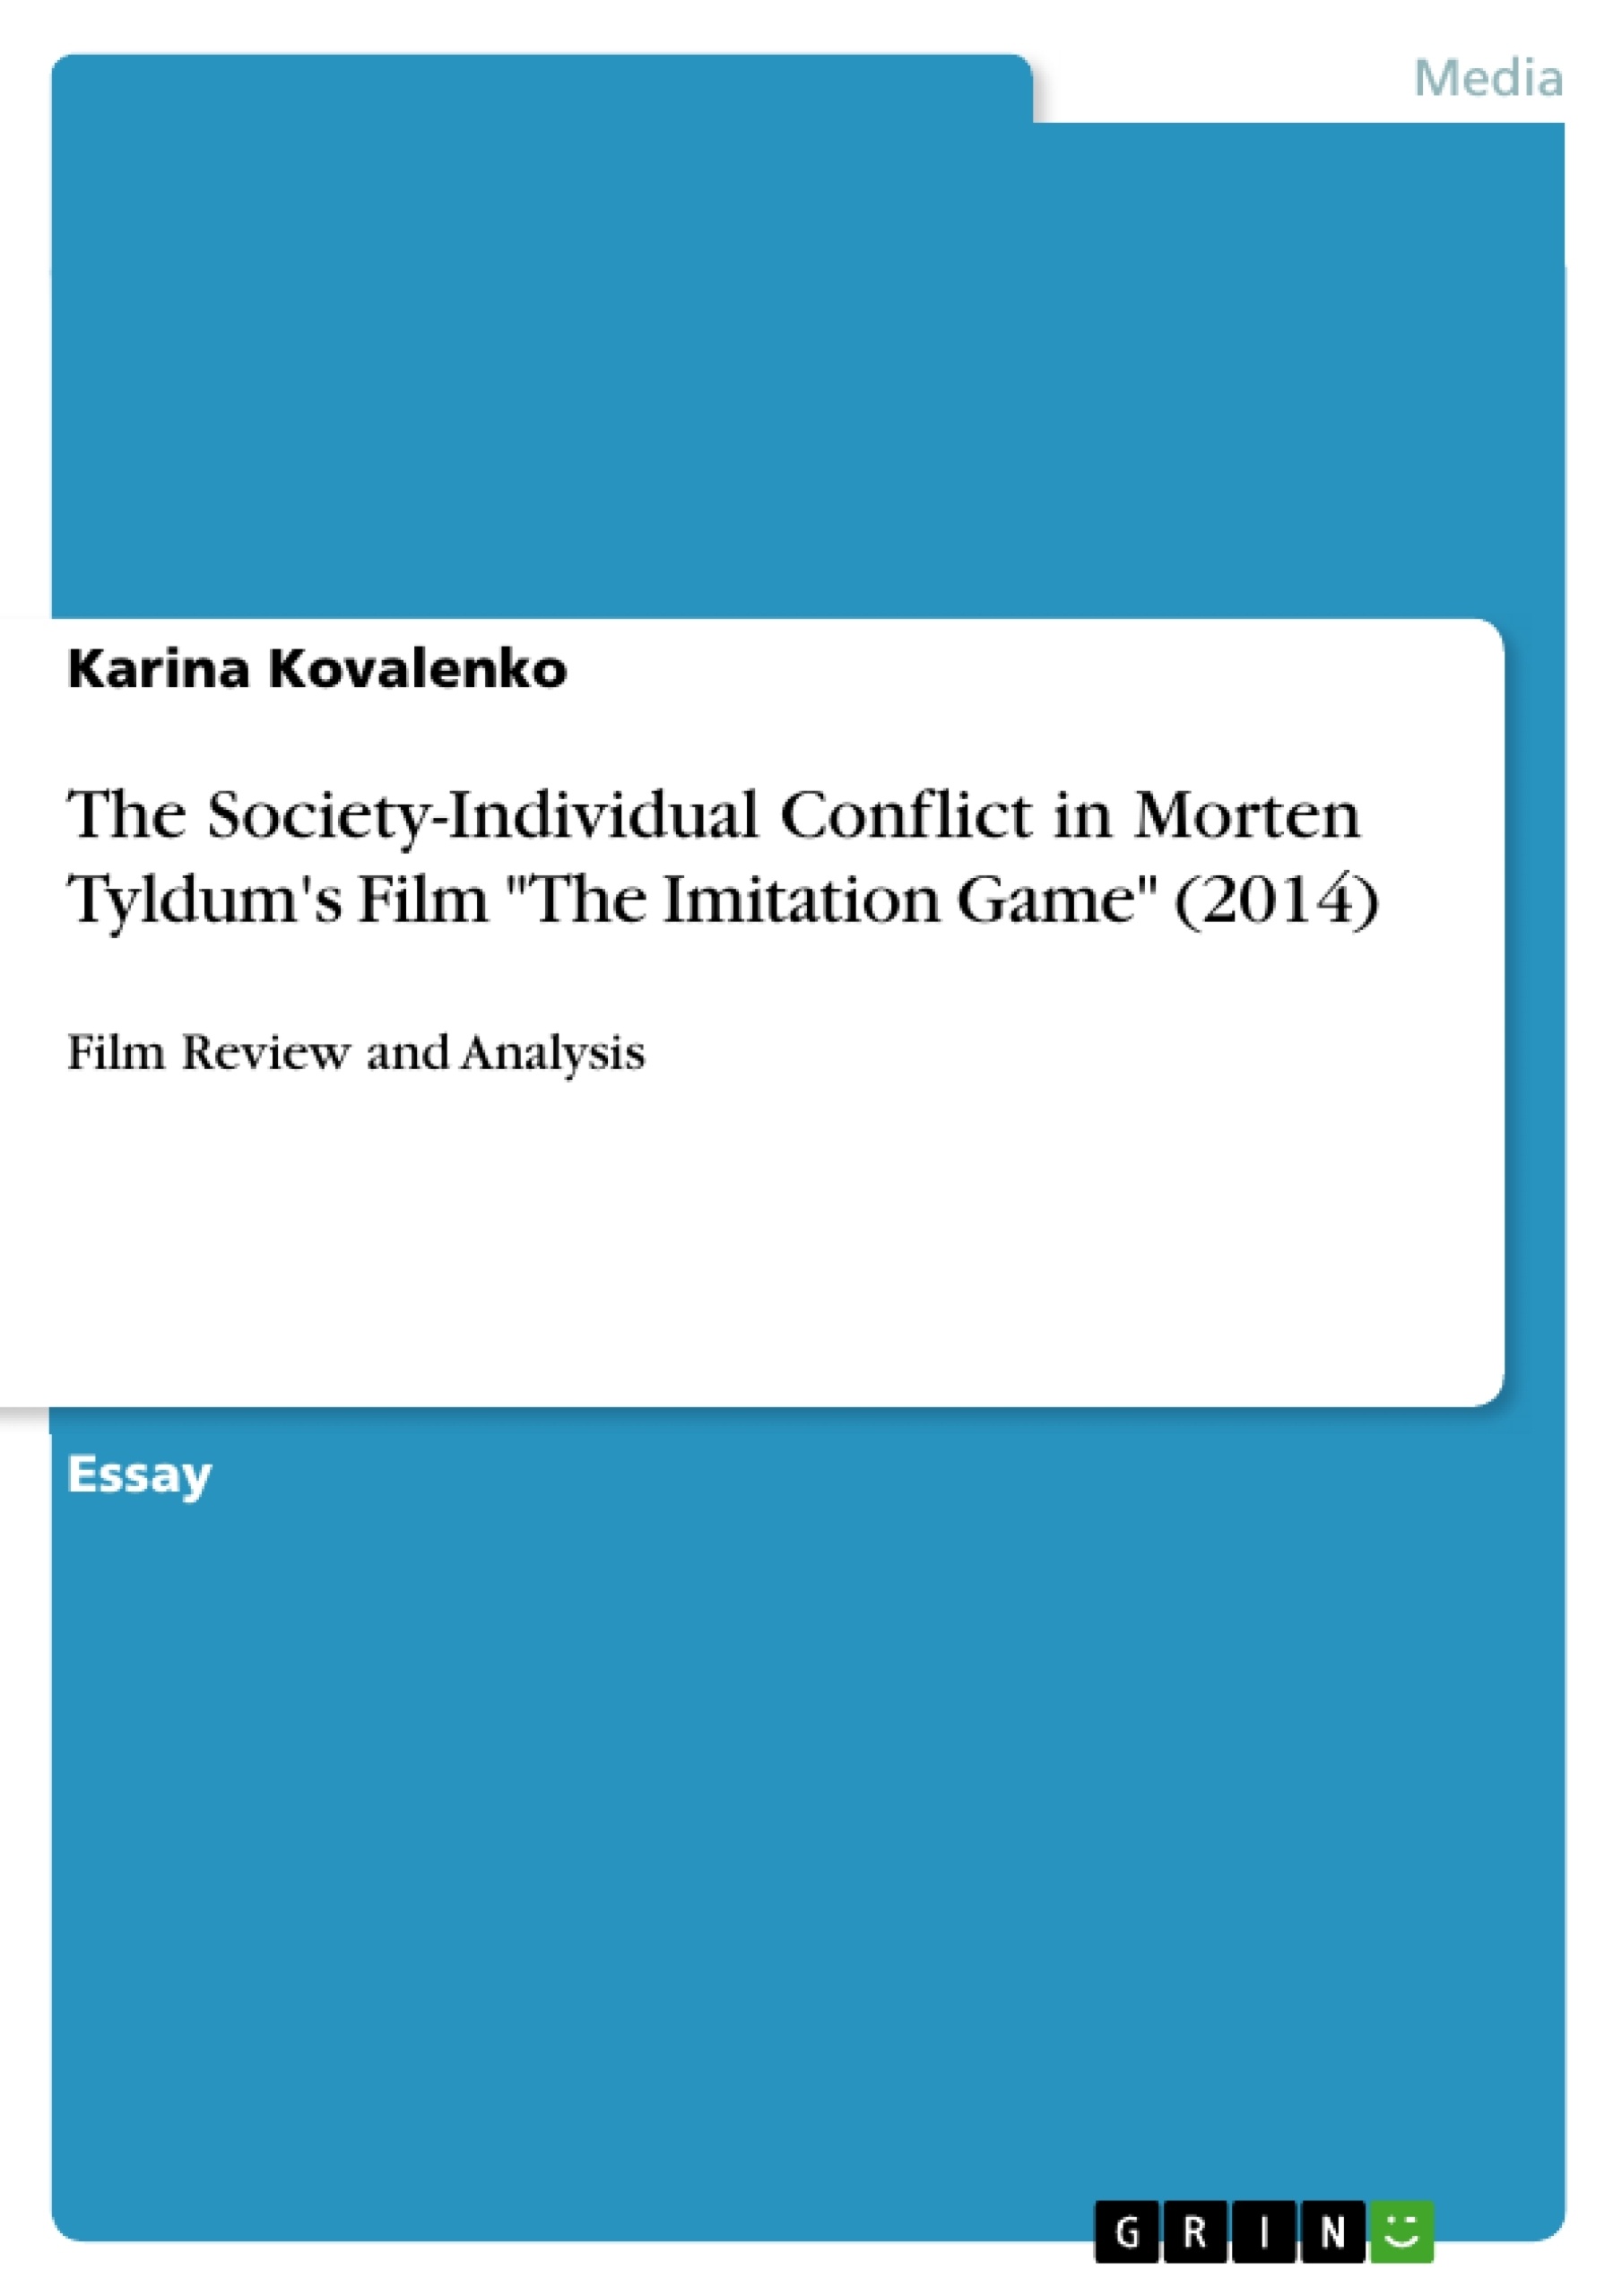 Titre: The Society-Individual Conflict in Morten Tyldum's Film "The Imitation Game" (2014)